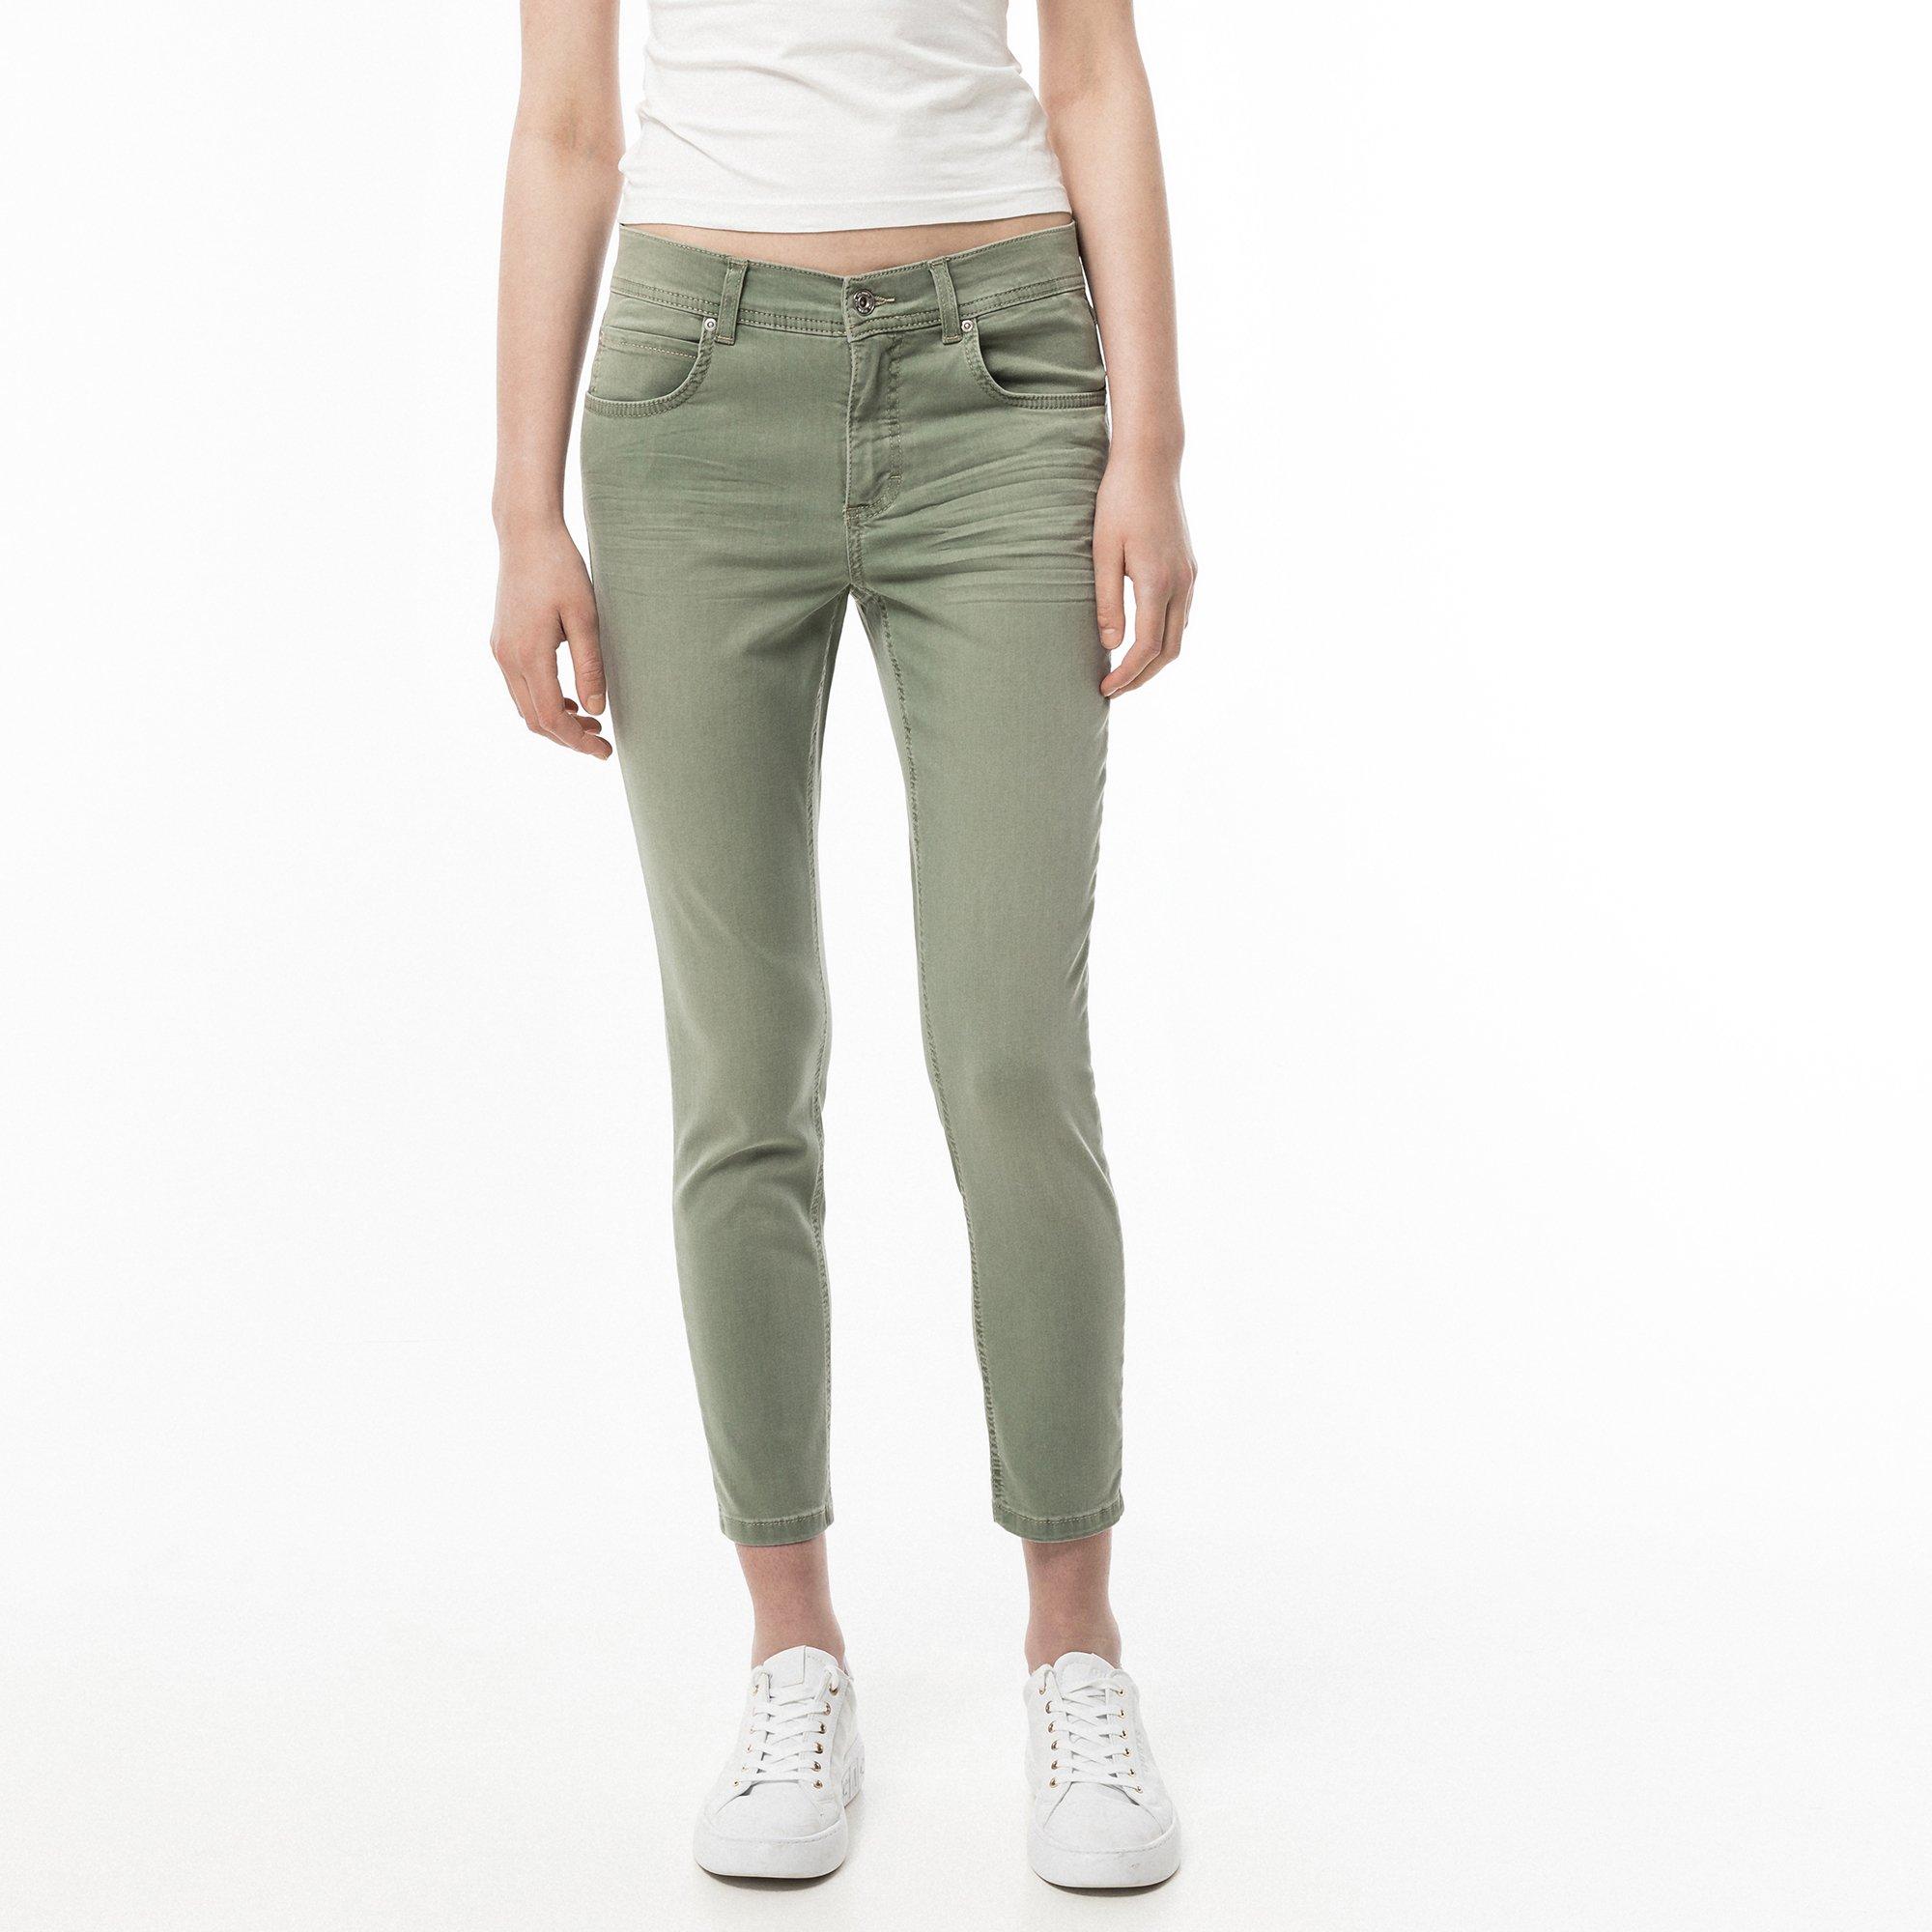 Image of ANGELS Ornella ankle Jeans, Skinny Fit - 46